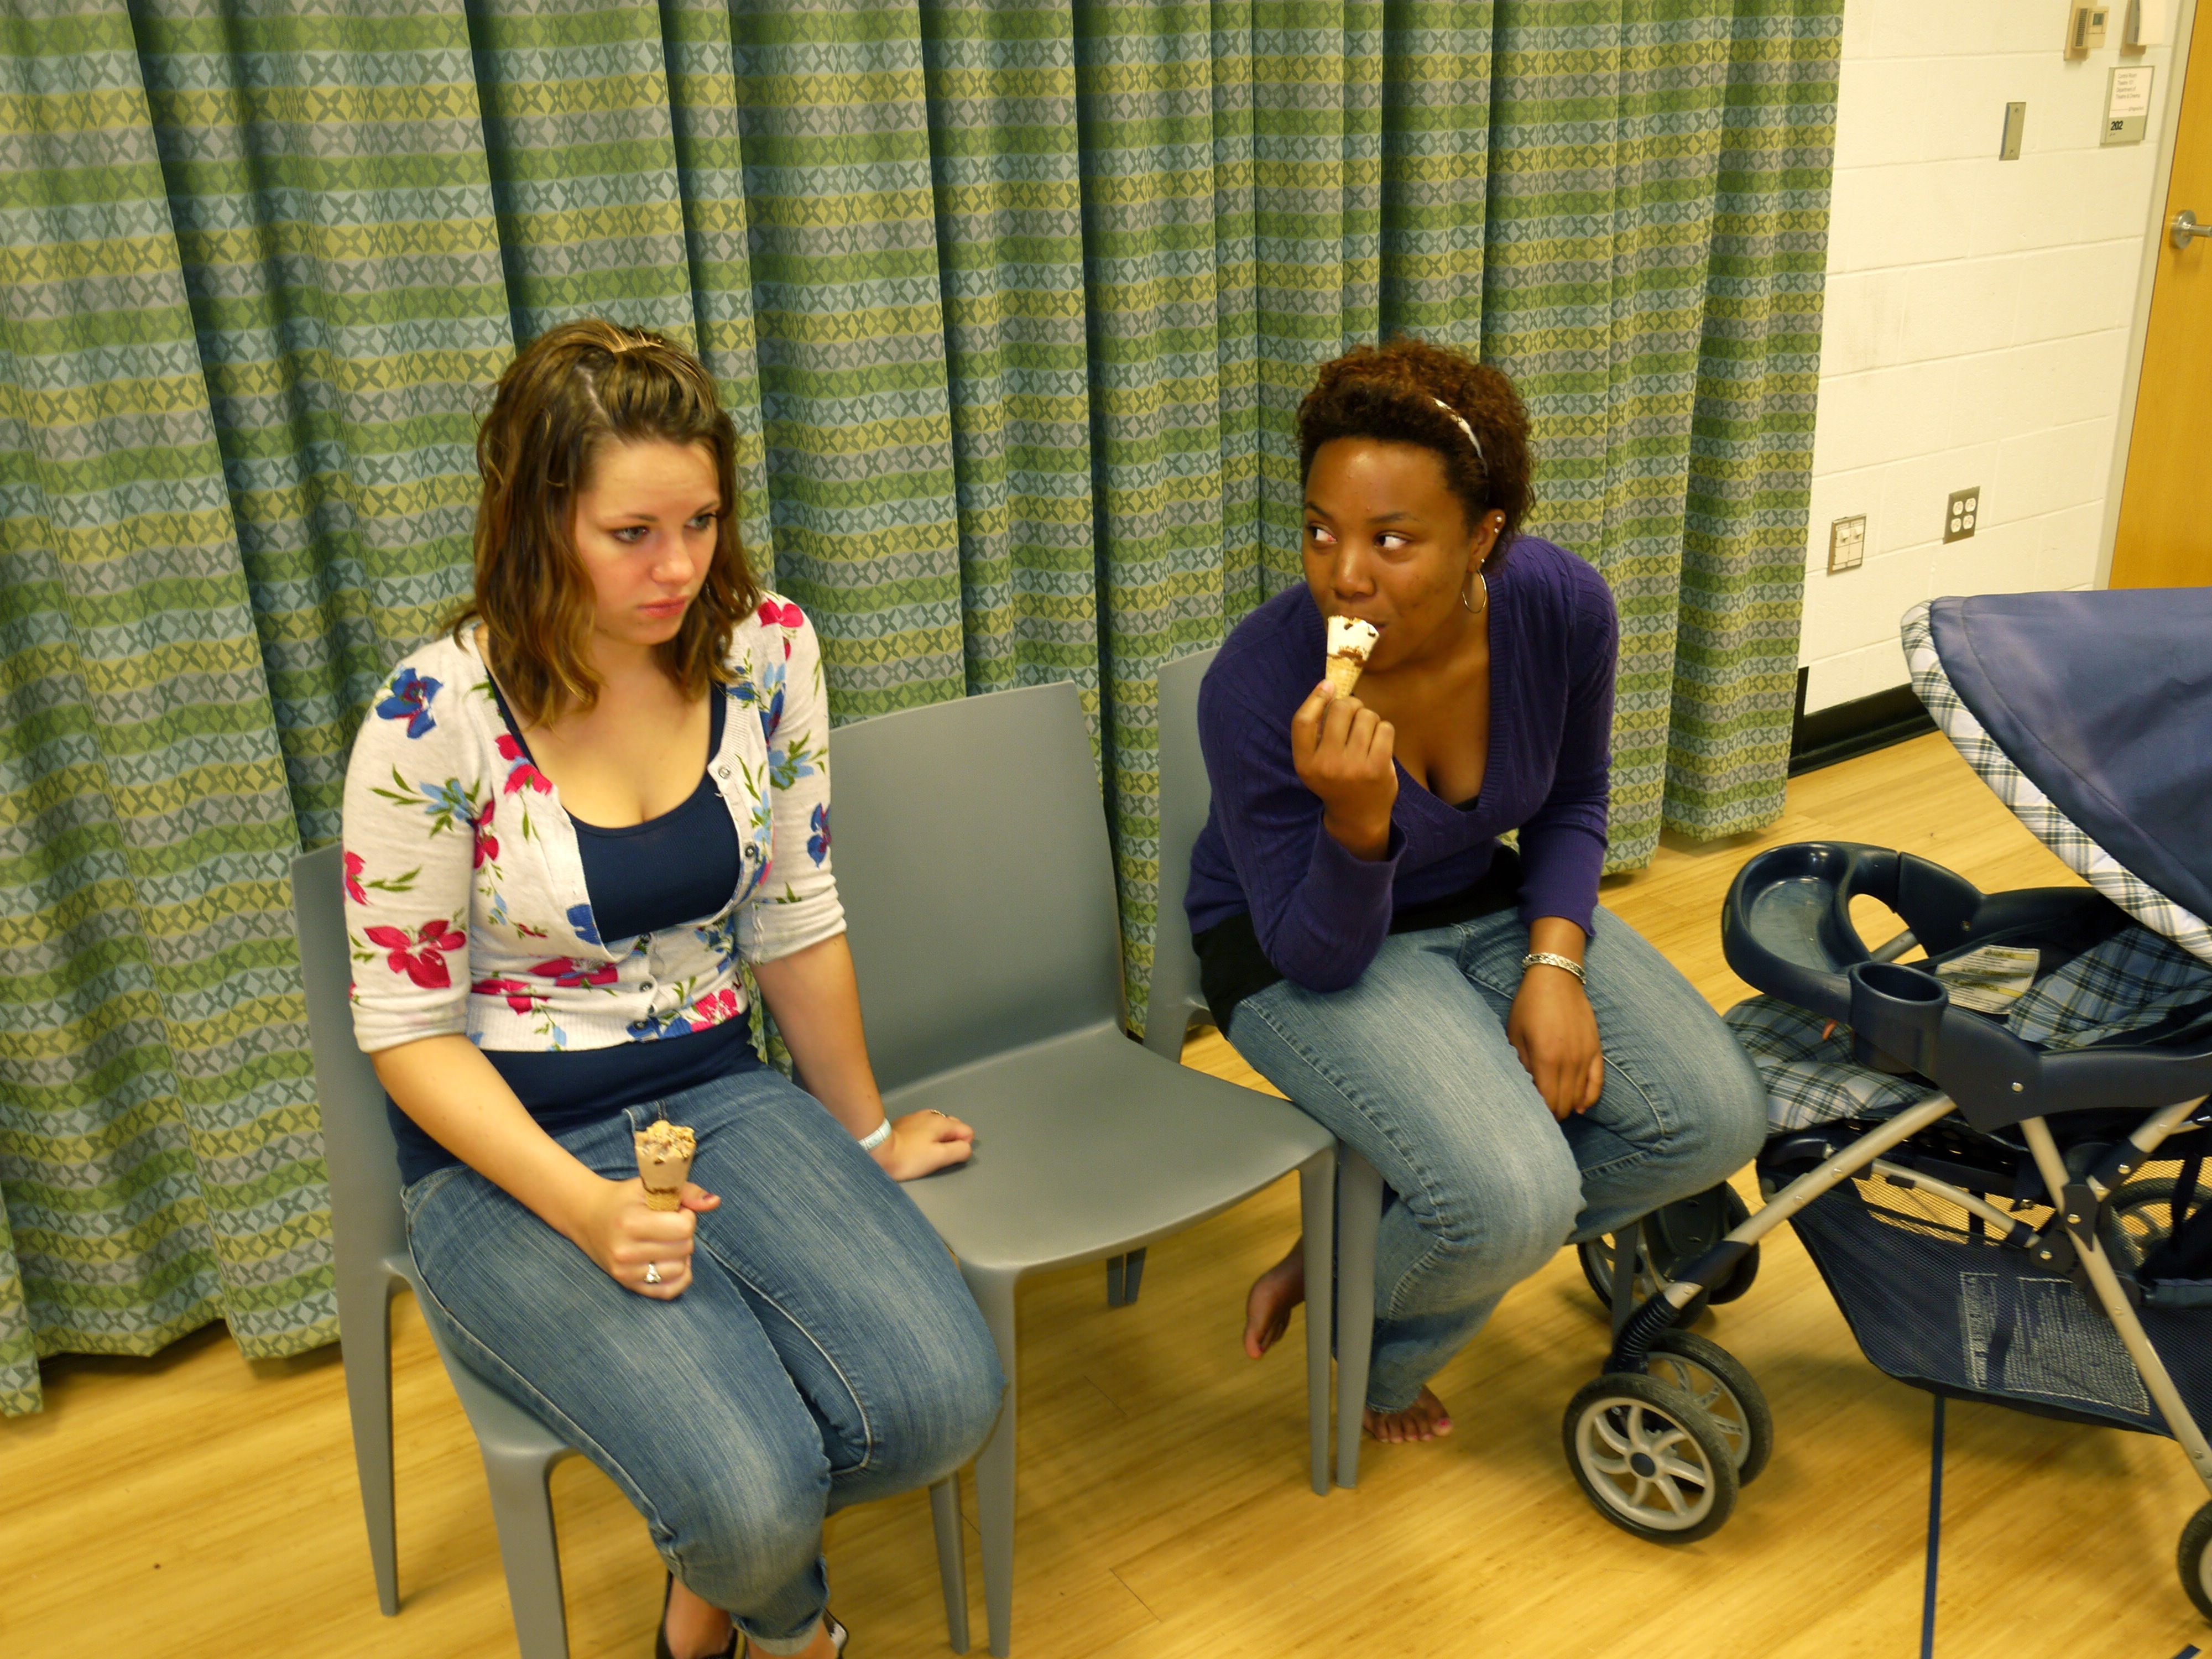 Alexis Demetra Baker (right) and Kristian Yelverton sit in chairs with ice cream cones.